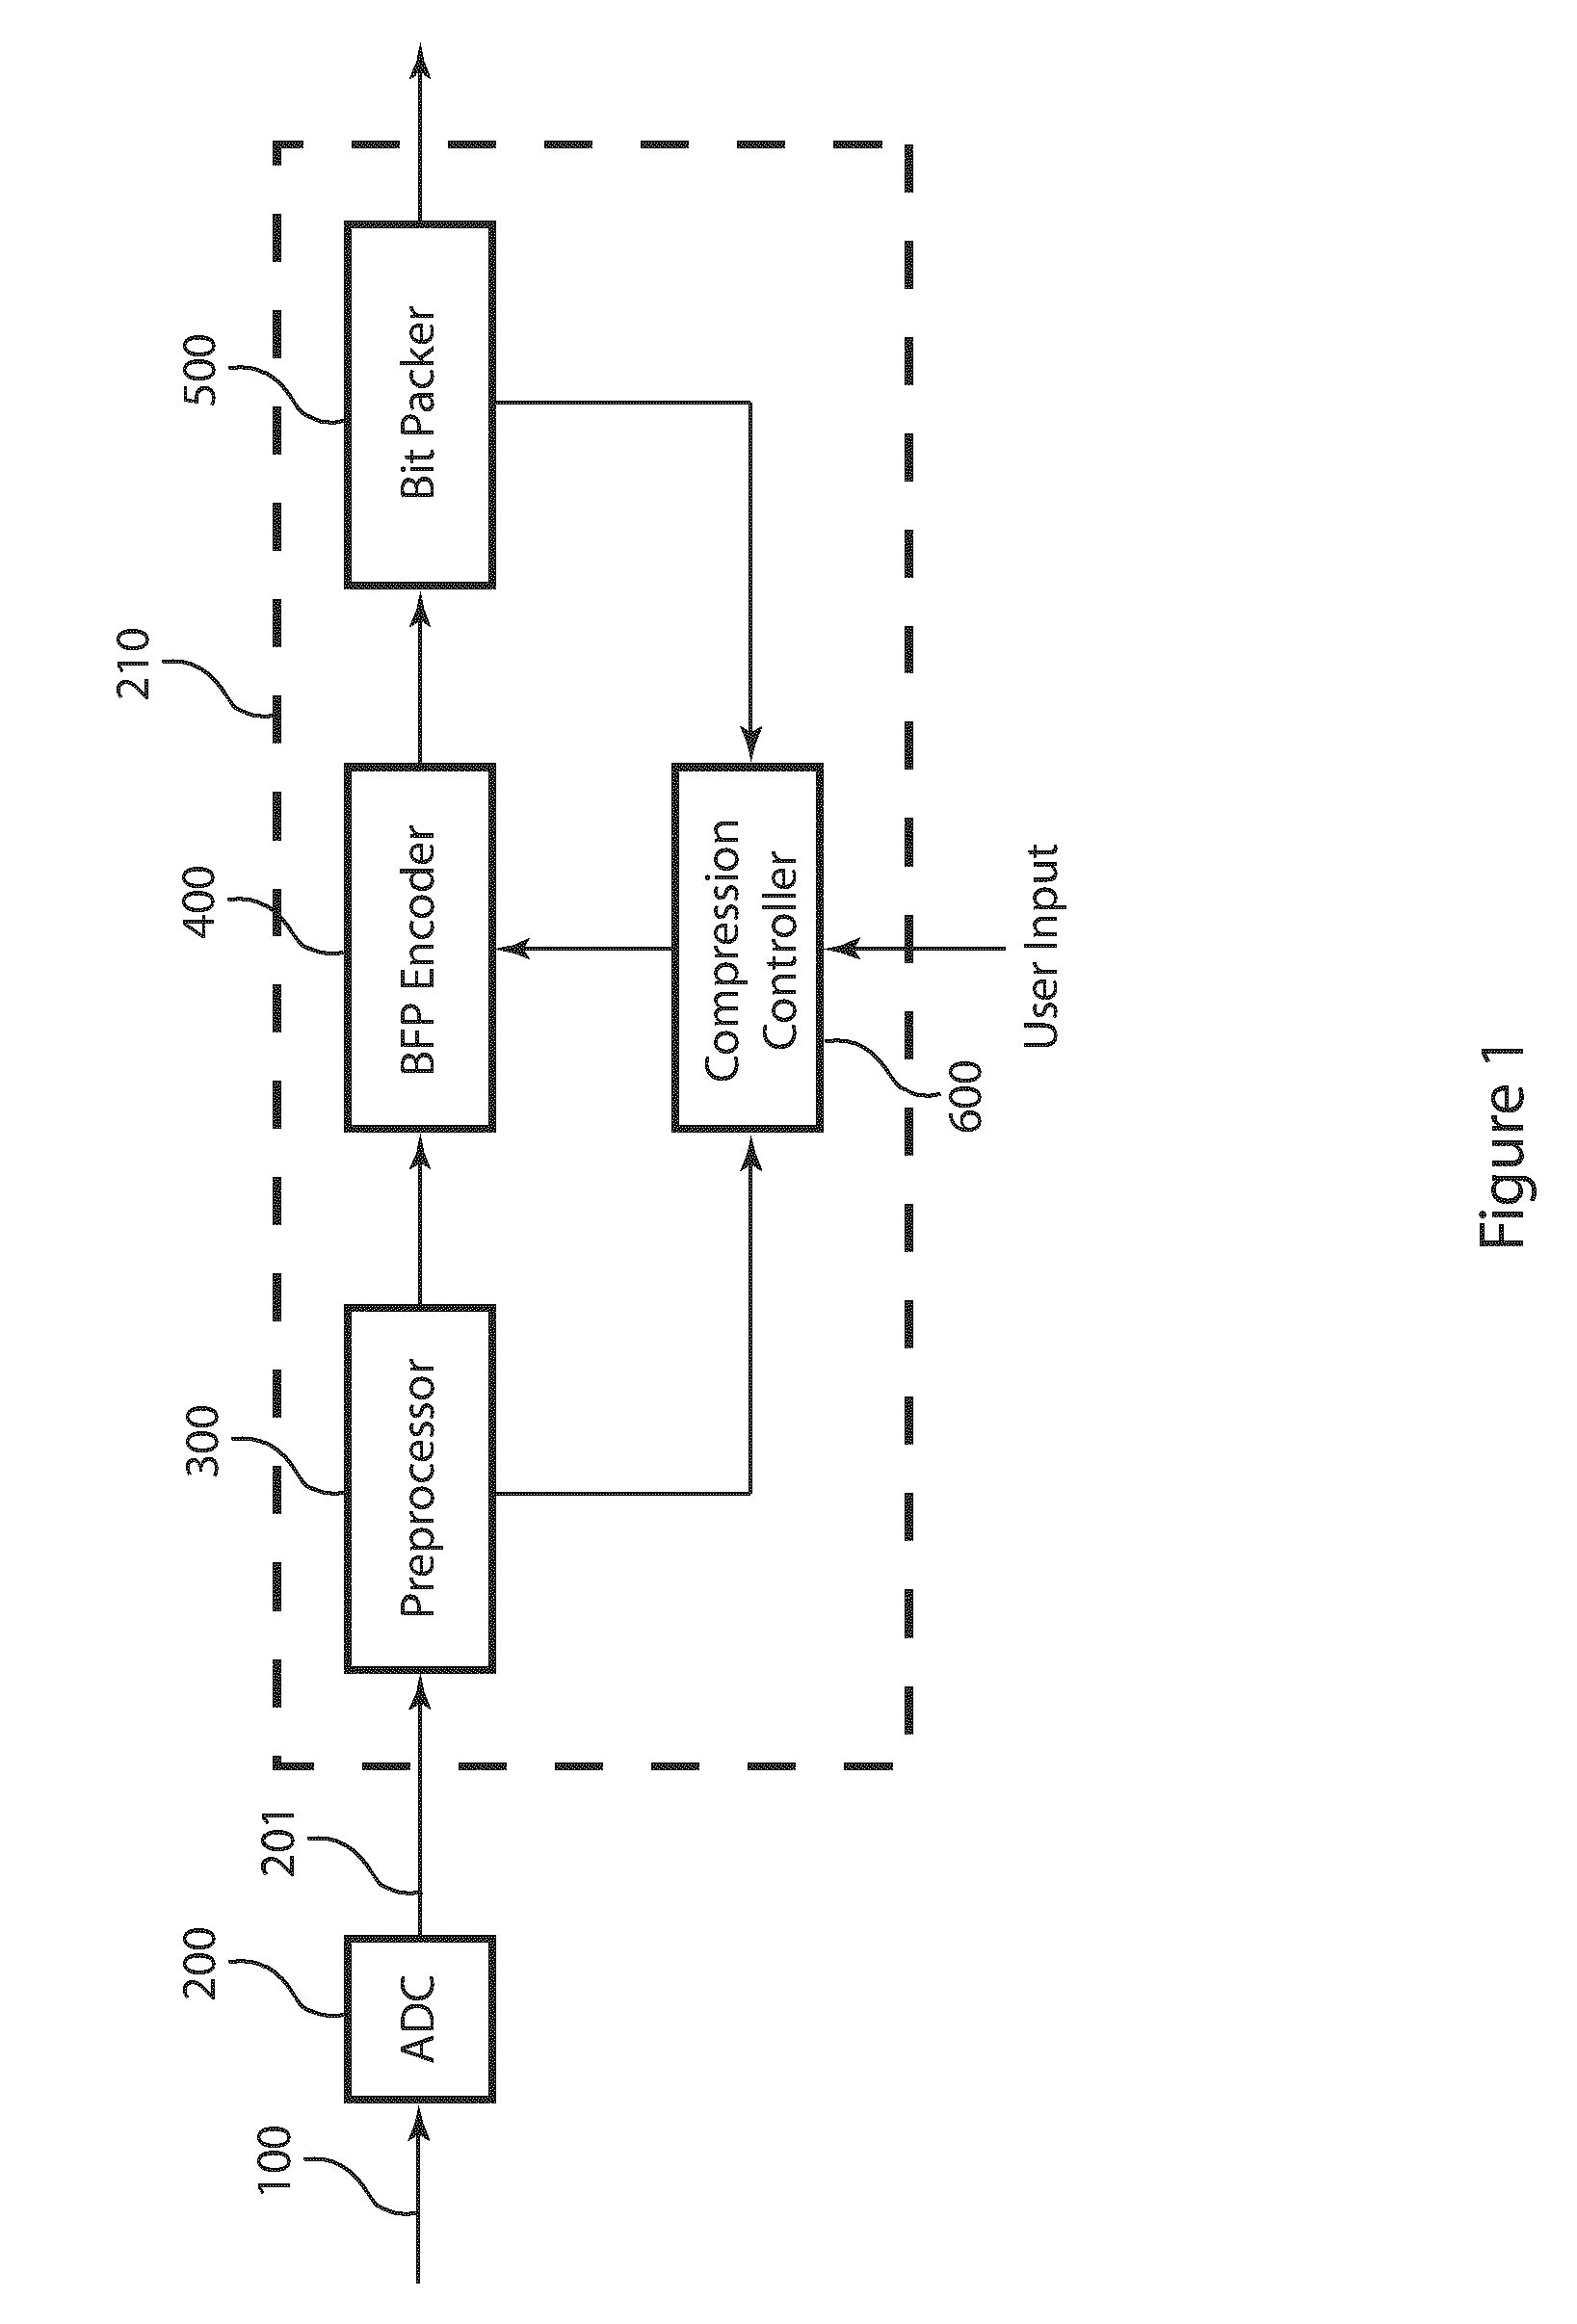 Block floating point compression of signal data